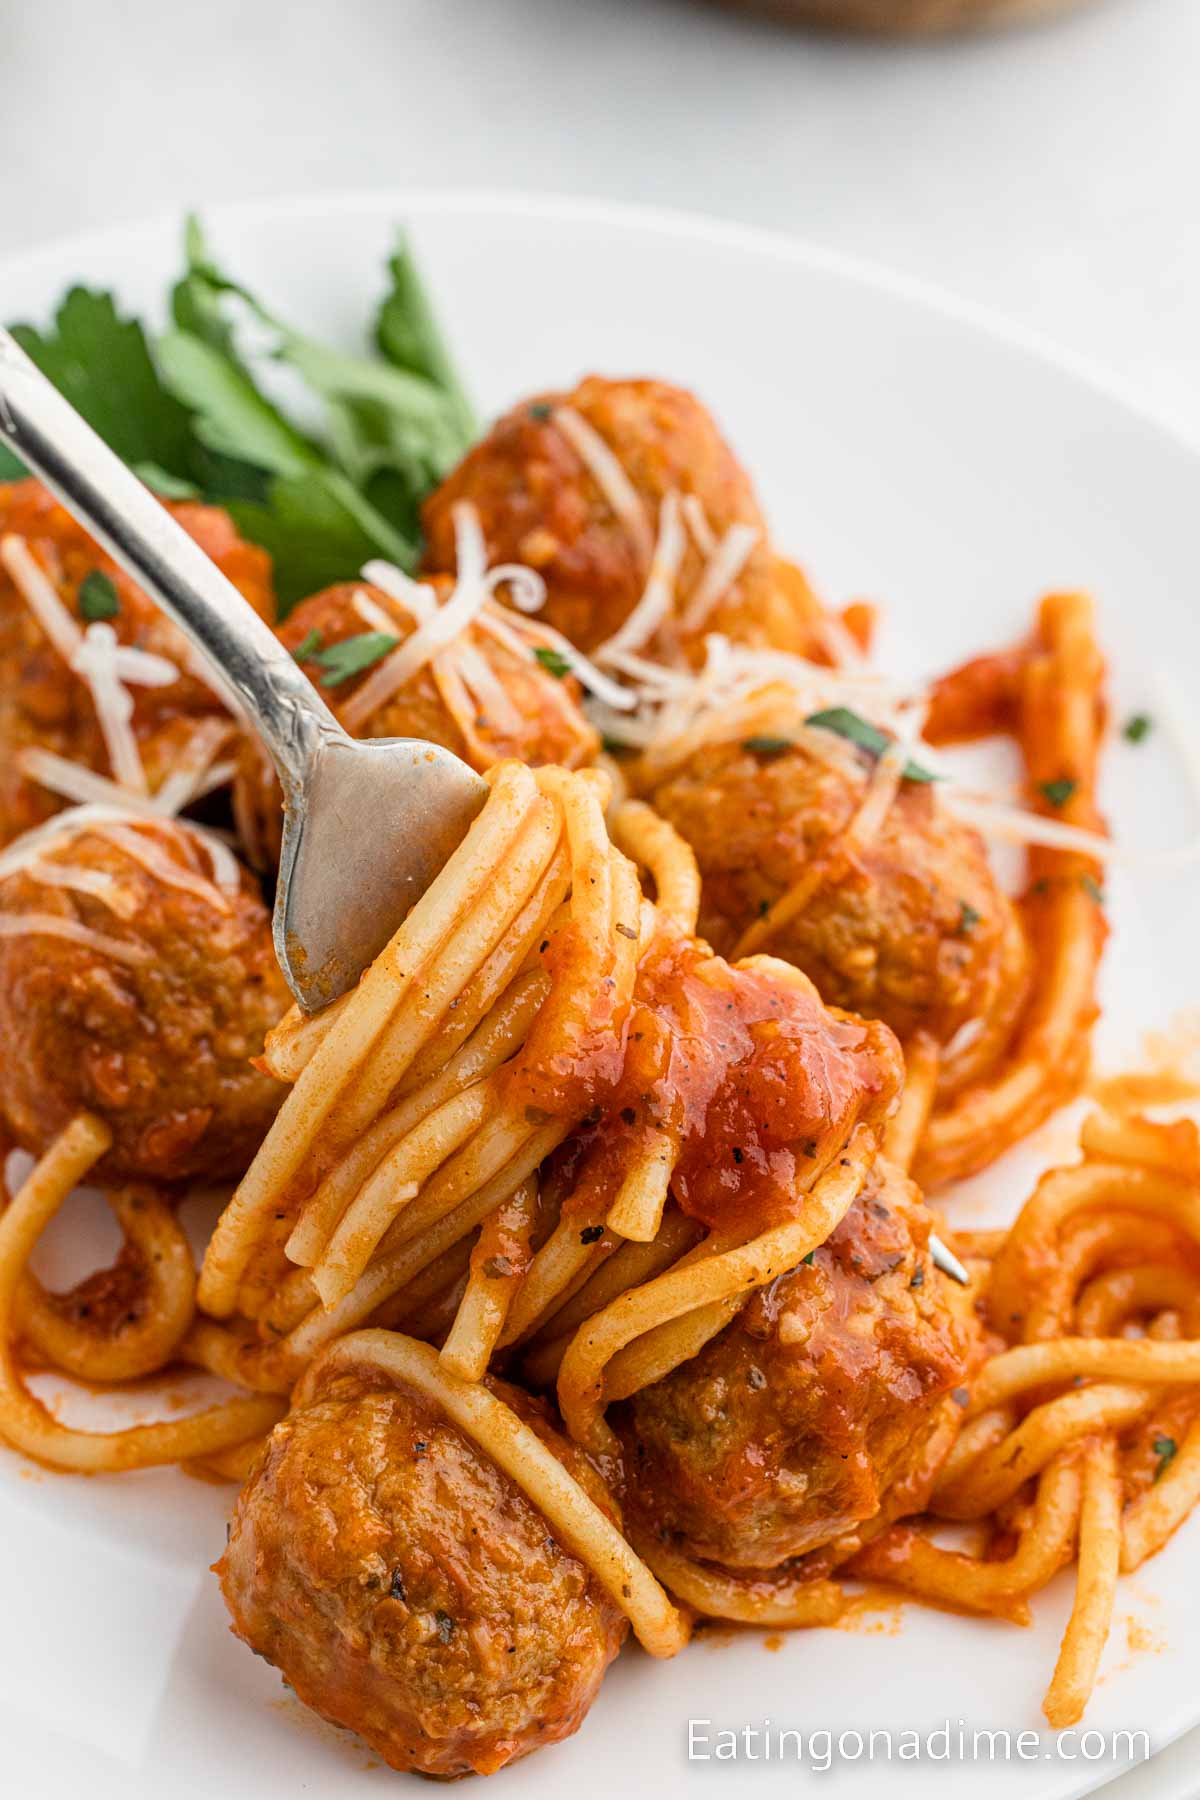 A serving of spaghetti and meatballs on a plate with a side of salad